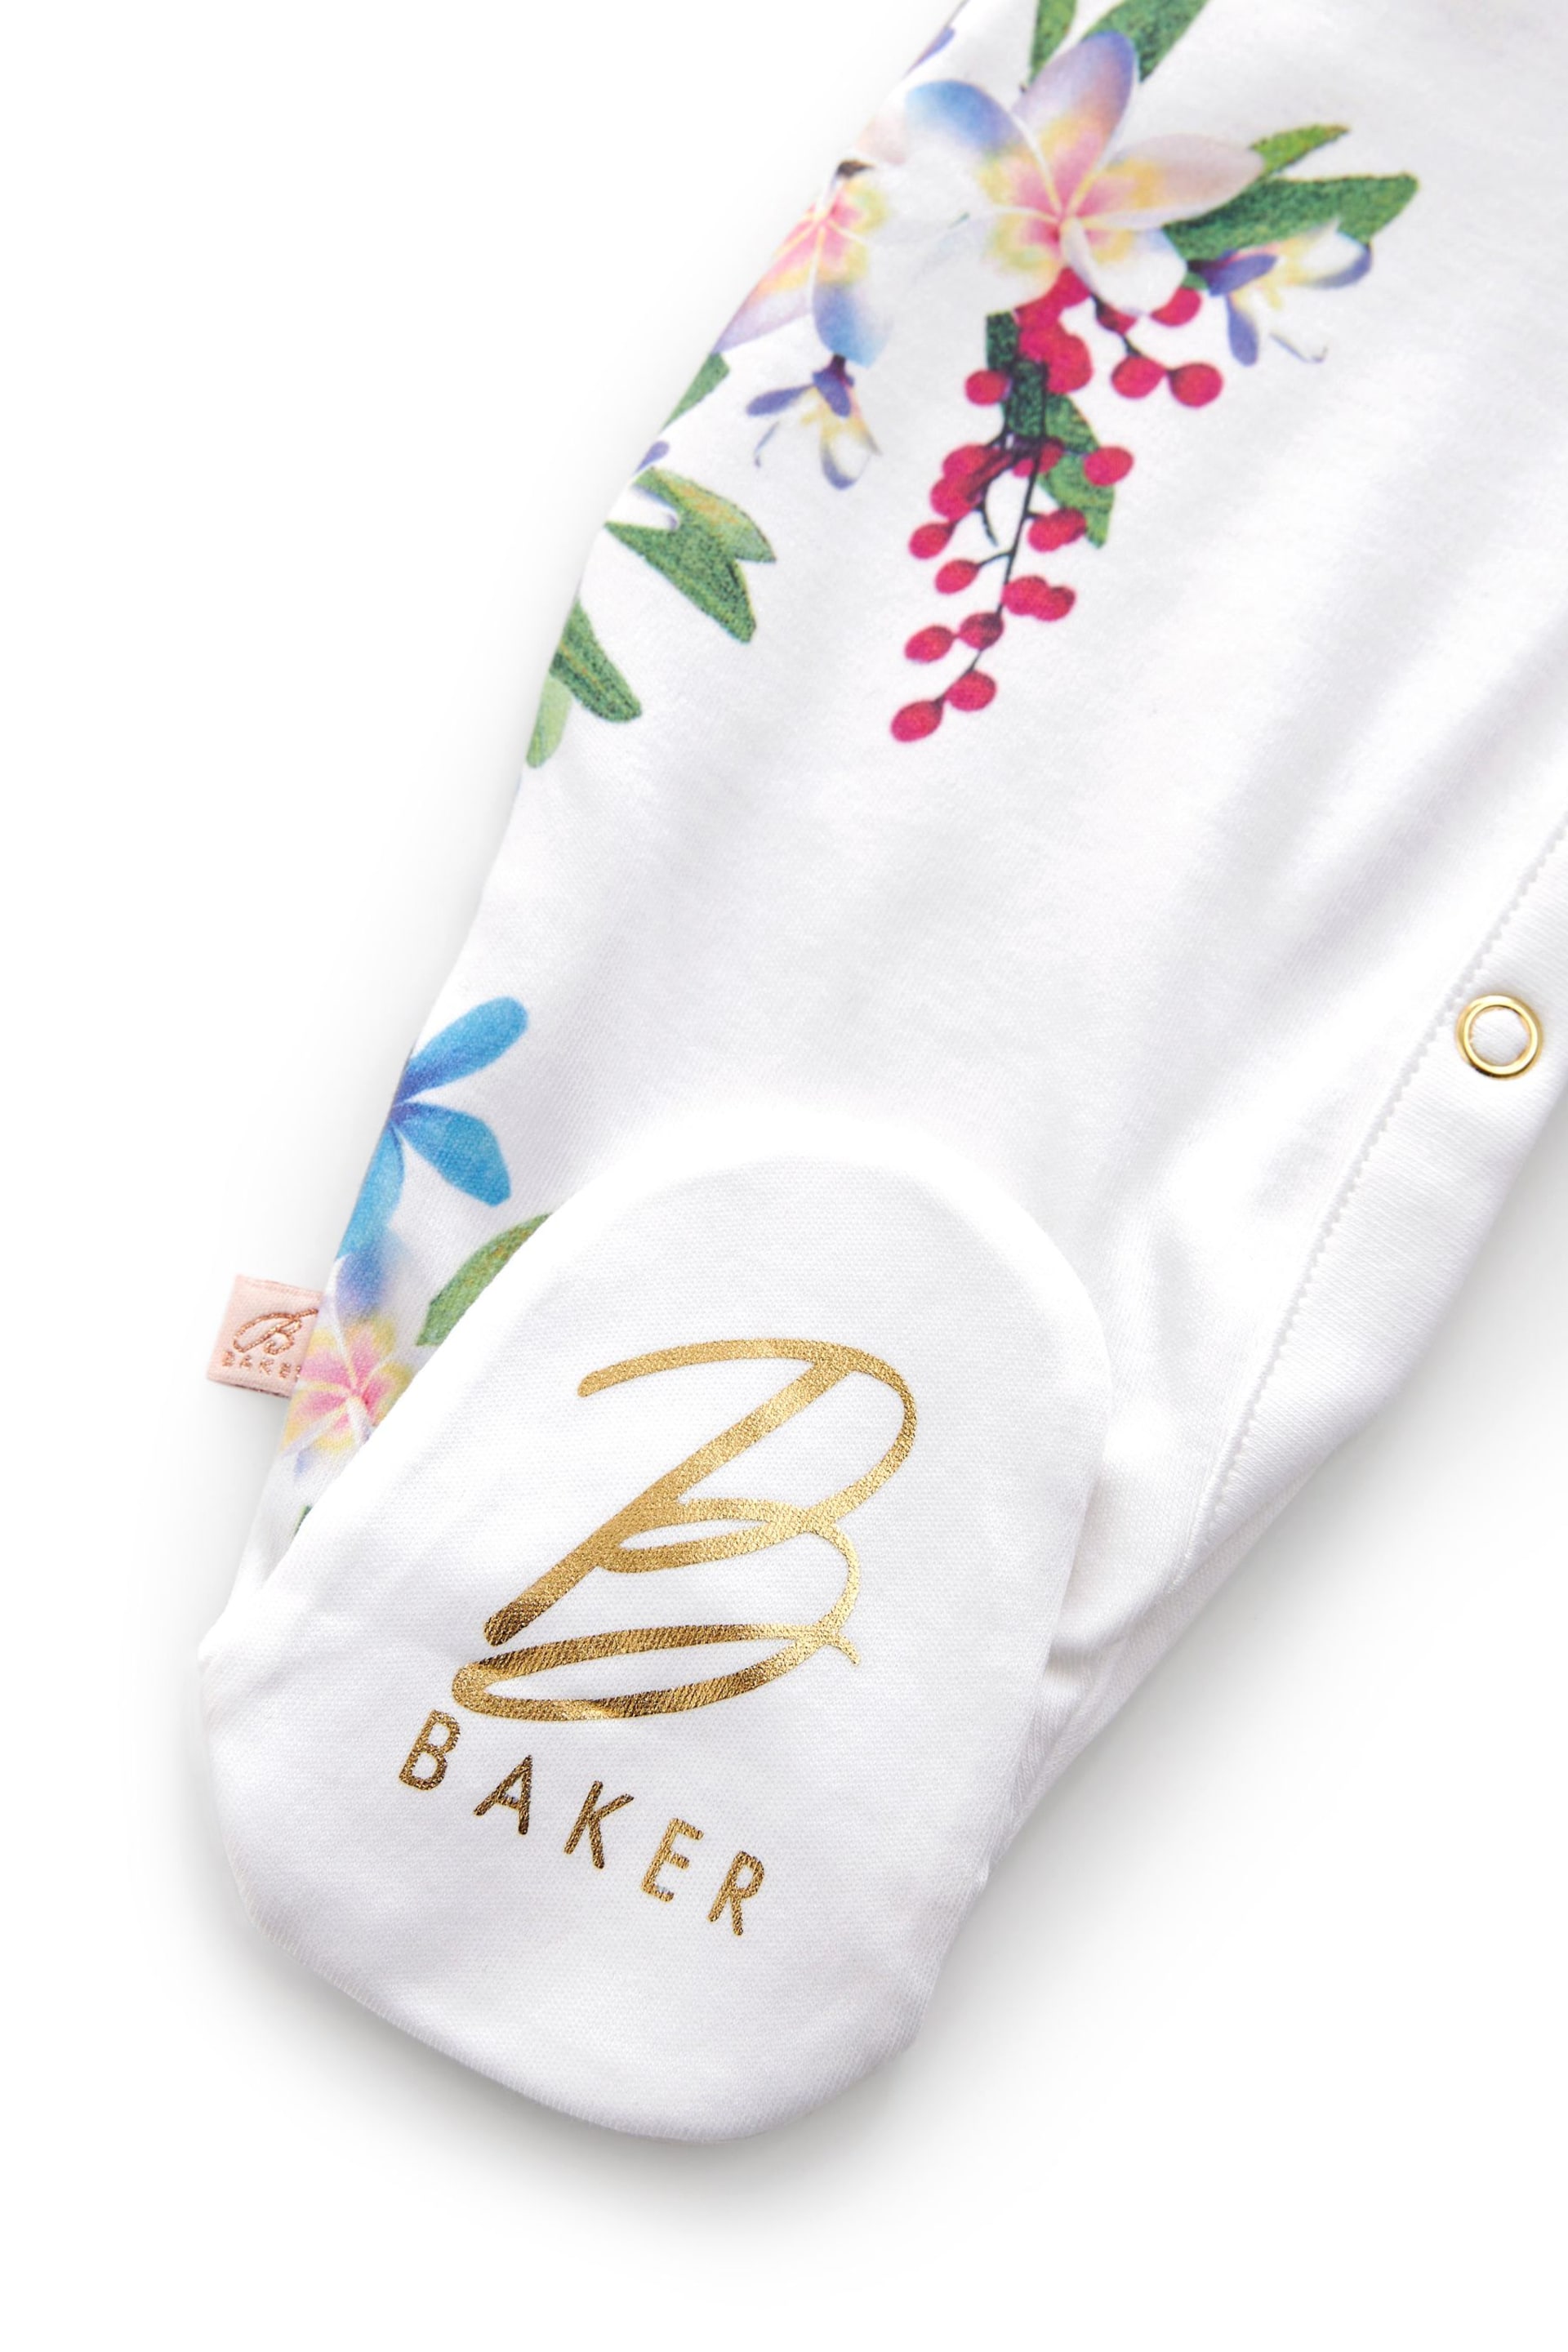 Baker by Ted Baker Mirror Floral White Sleepsuit And Hat Set - Image 4 of 5